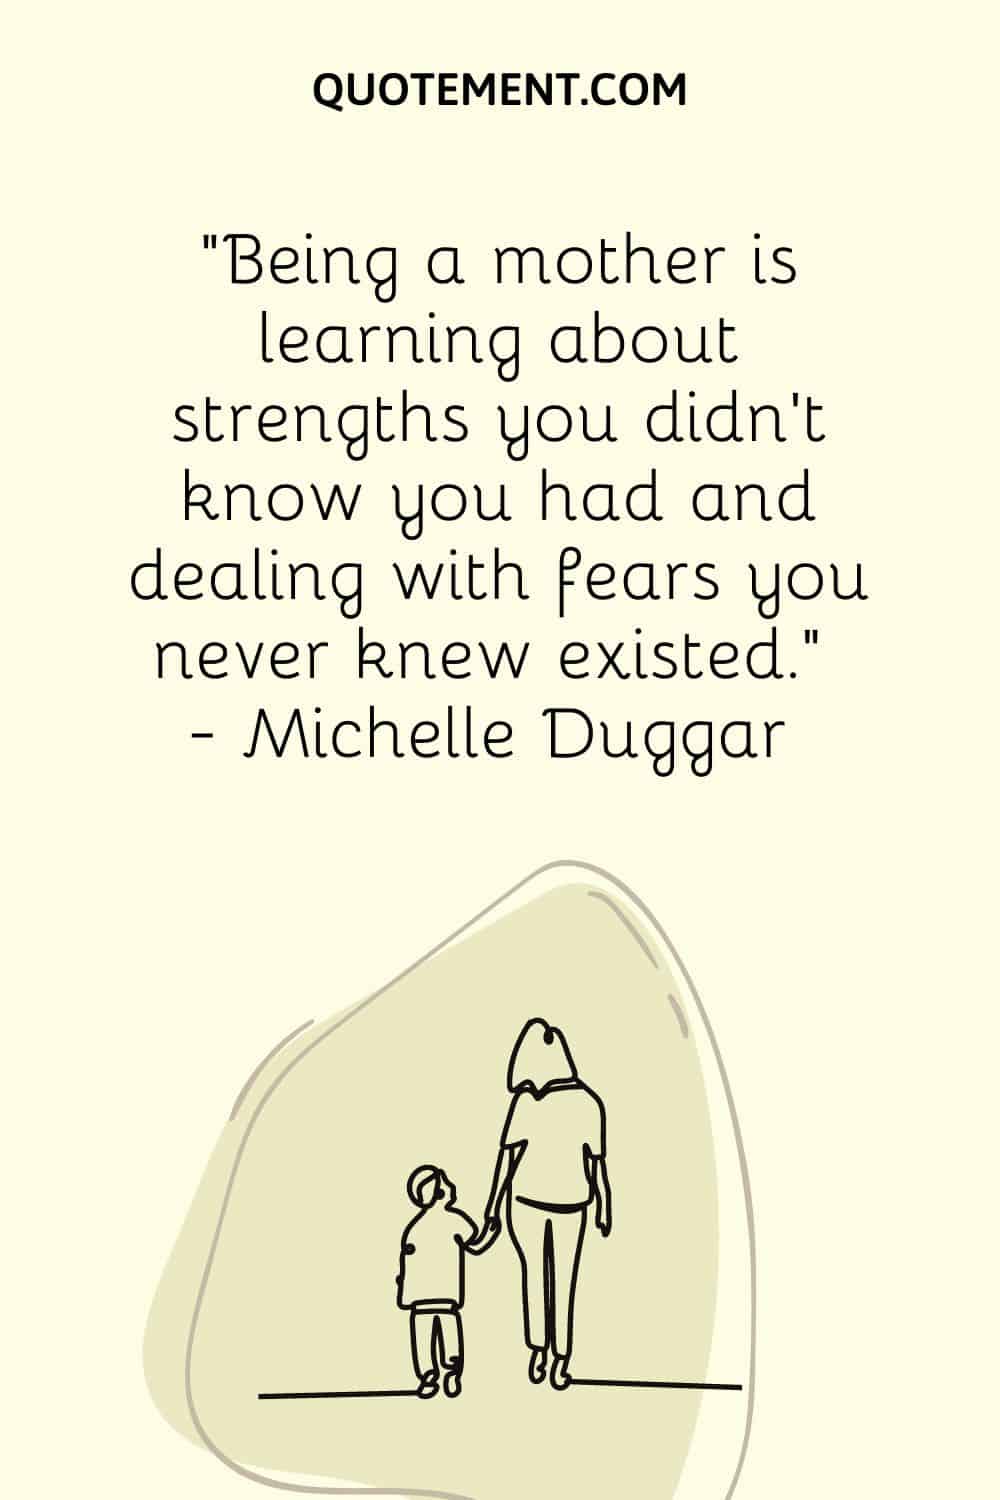 Being a mother is learning about strengths you didn’t know you had and dealing with fears you never knew existed